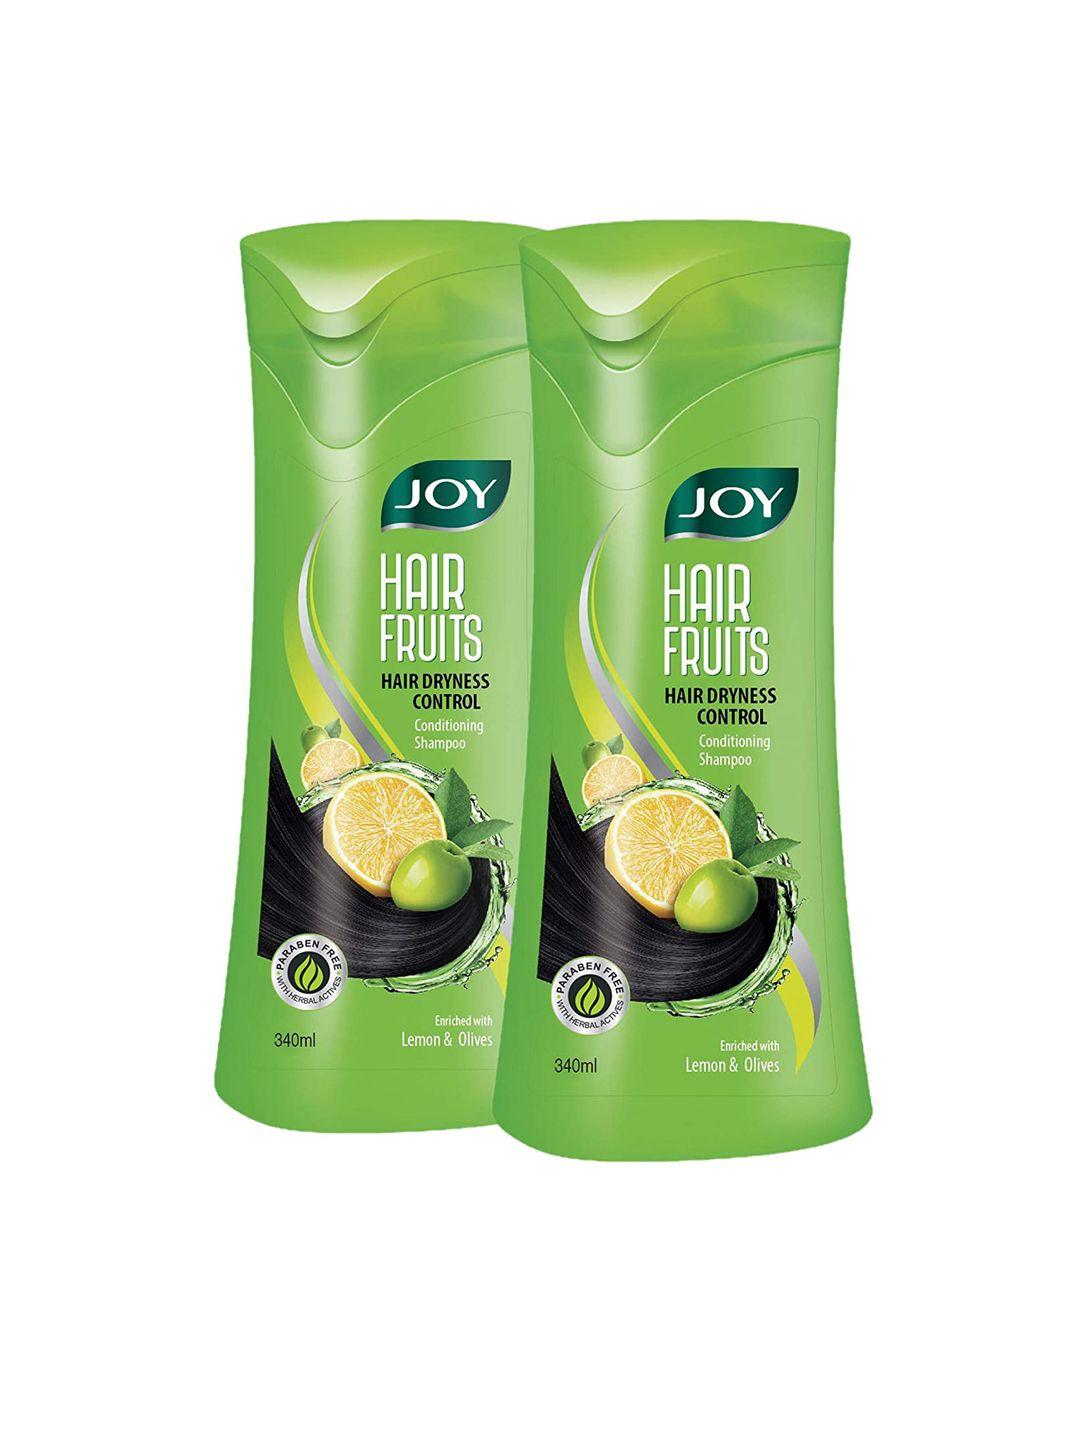 joy set of 2 hair fruits dryness control conditioning shampoo with olives - 340ml each